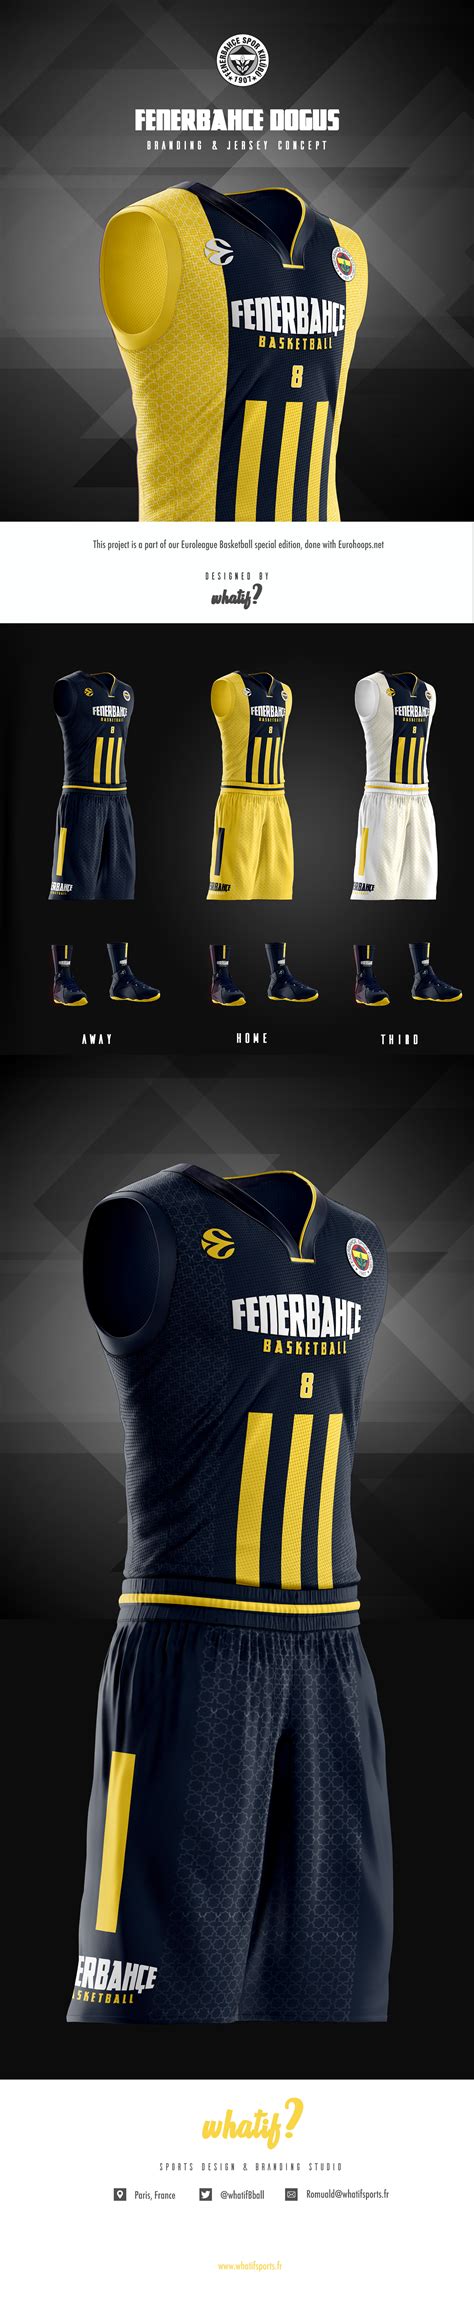 .(euroleague basketball), this is a space where we aim to cover all european basketball activities including relevant national team competitions, european youth basketball and all levels of european. Euroleague Basketball special edition : Fenerbahce on Behance